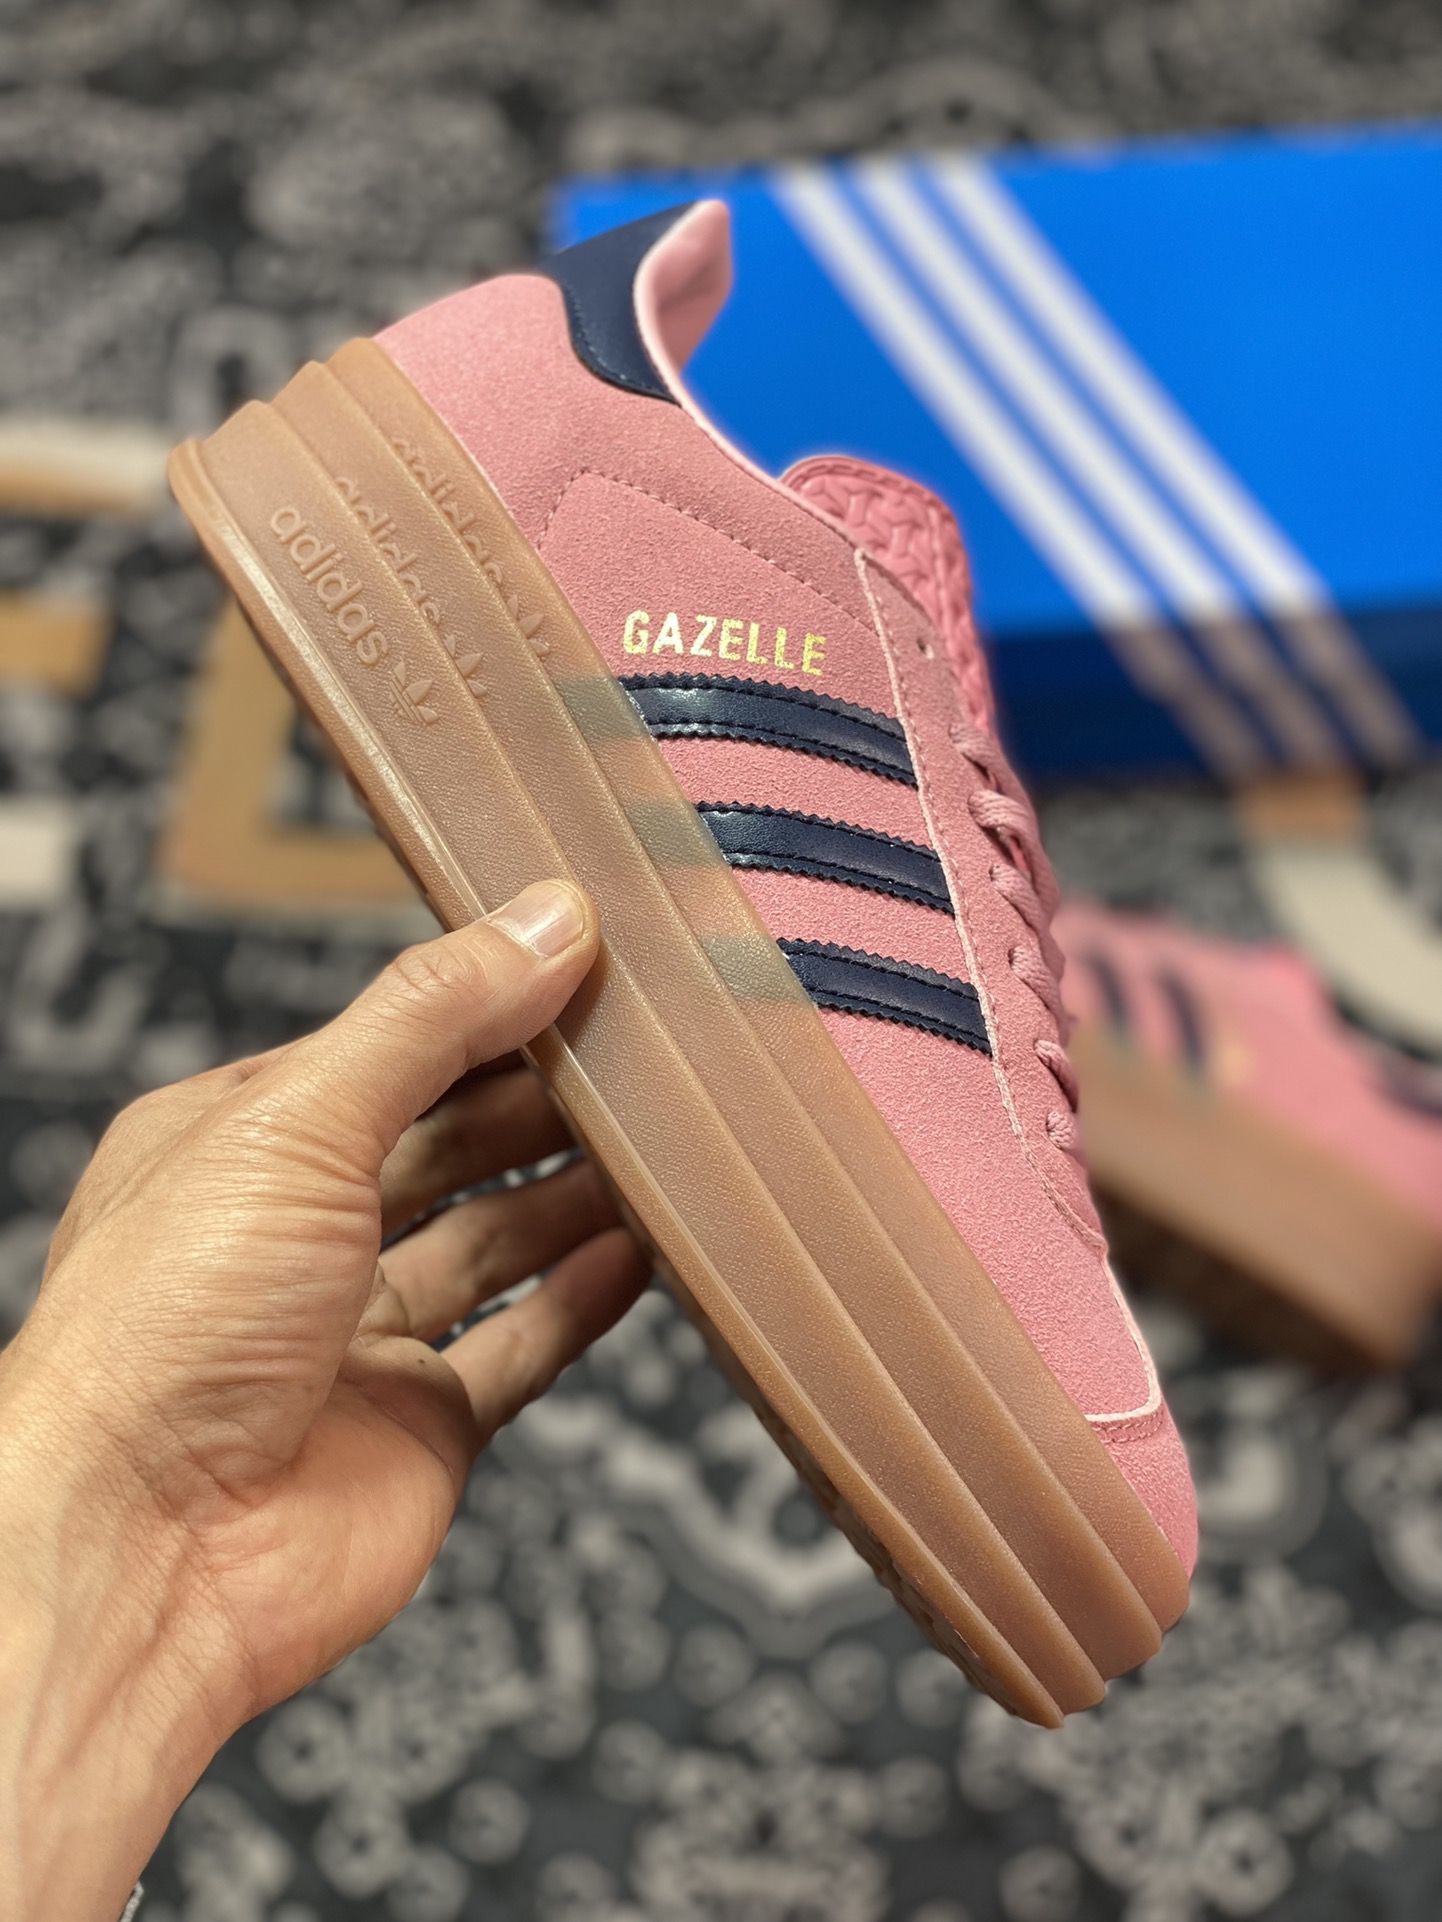 Adidas Originals Gazelle Bold W Antelope Platform Series Retro All-match Thick-soled Height-enhancing Low-top Sneakers 